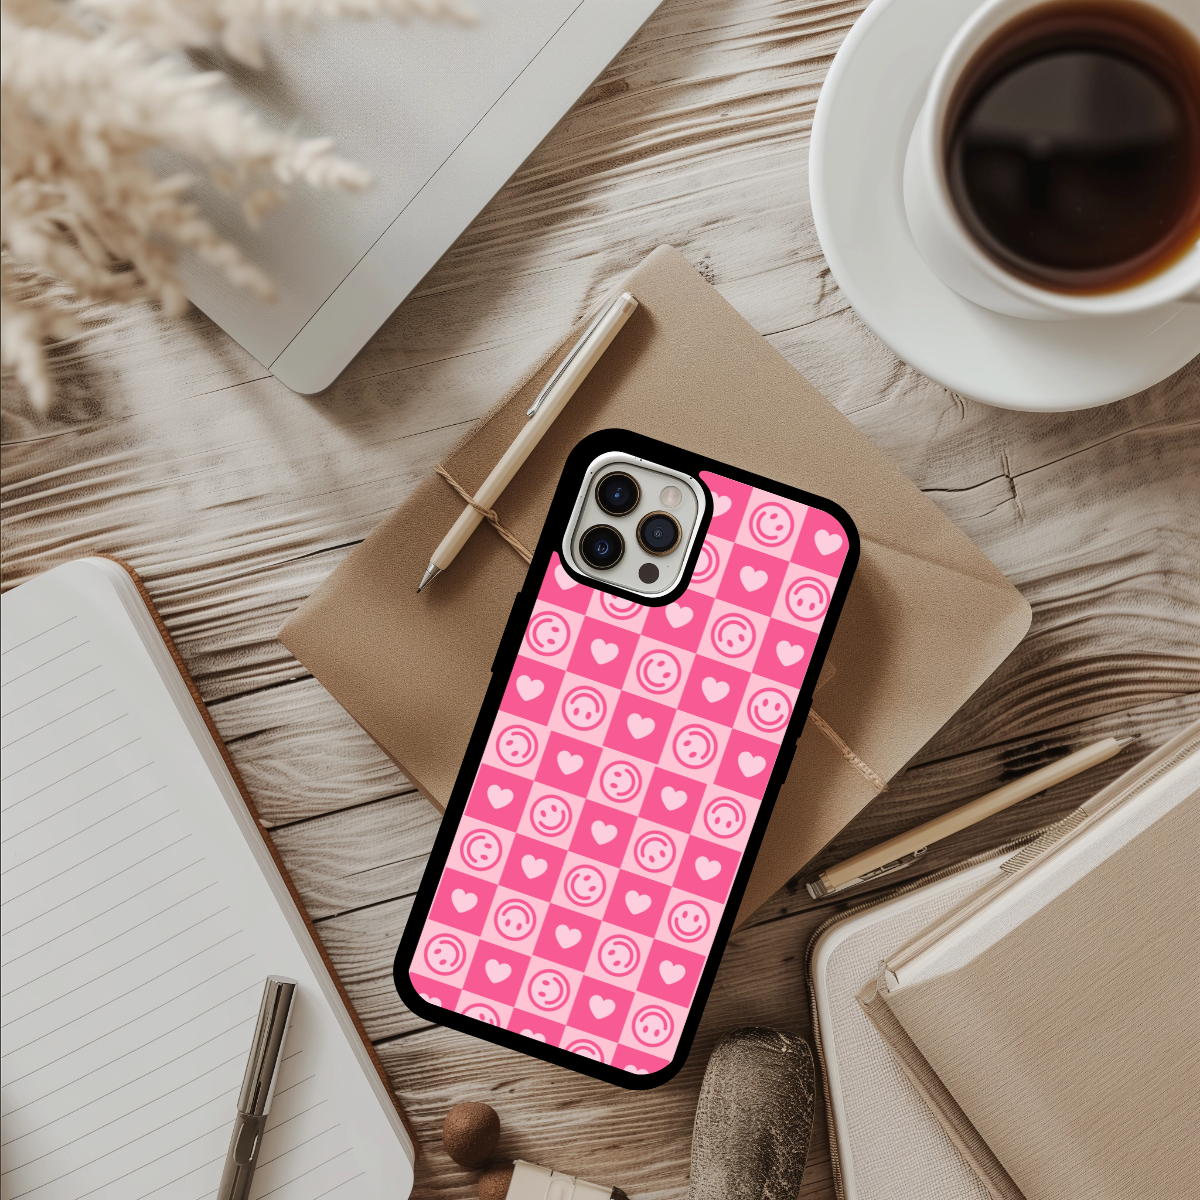 Stylish phone case |  Pink Phone case gift for her - Emoji  iPhone Case - heart phone case - Trendy Phone Accessory - Girly - Gifts for teens